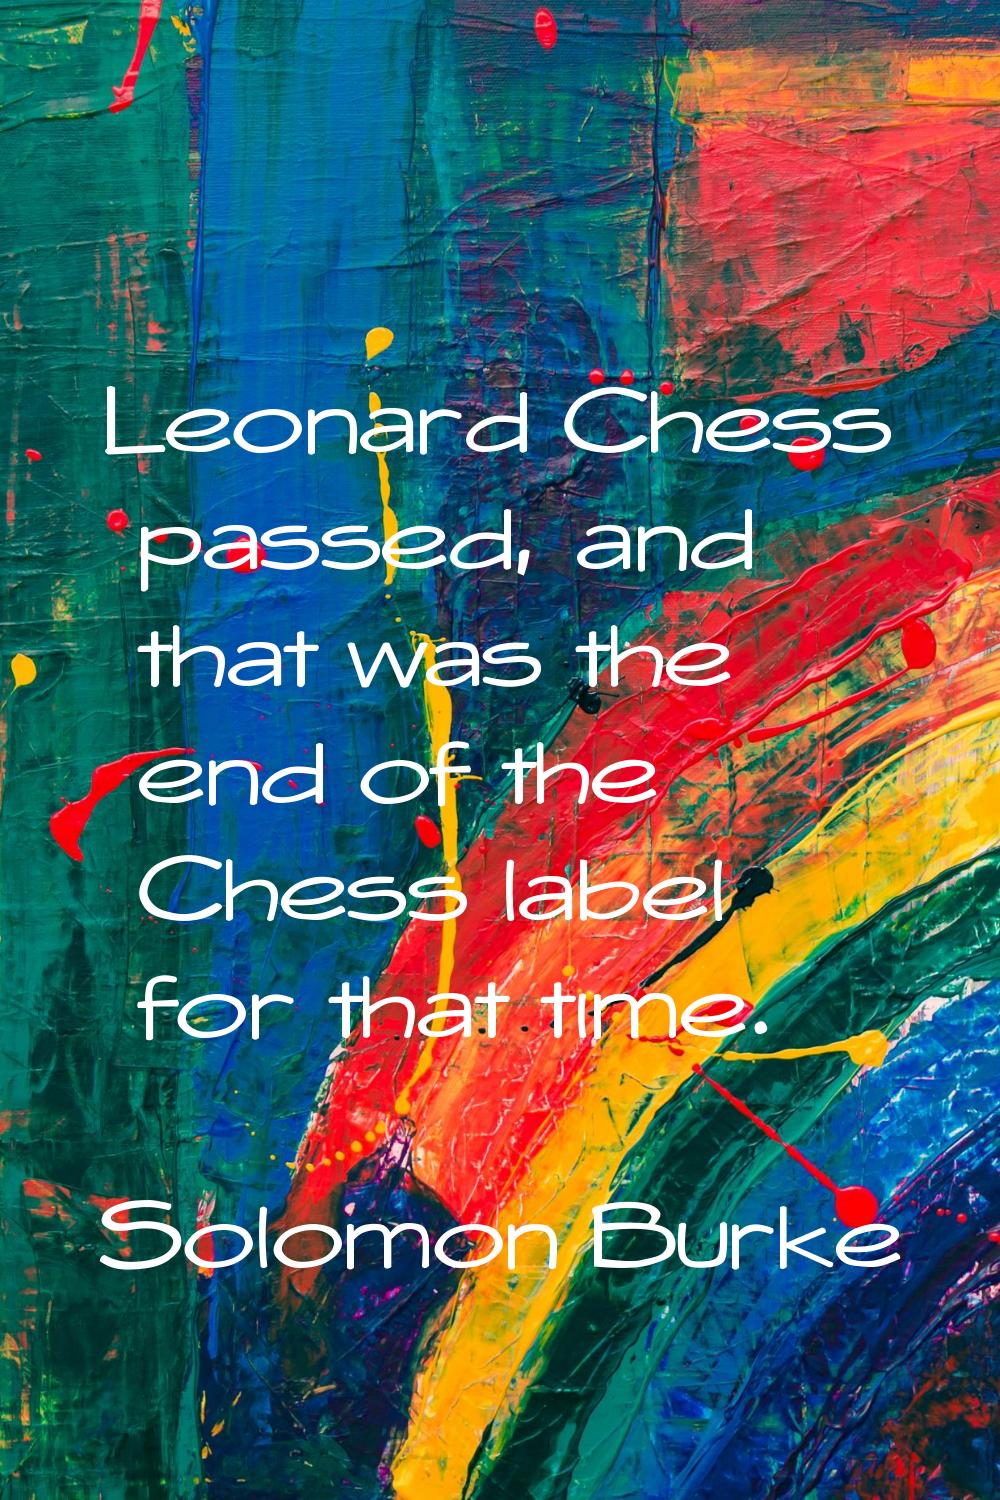 Leonard Chess passed, and that was the end of the Chess label for that time.